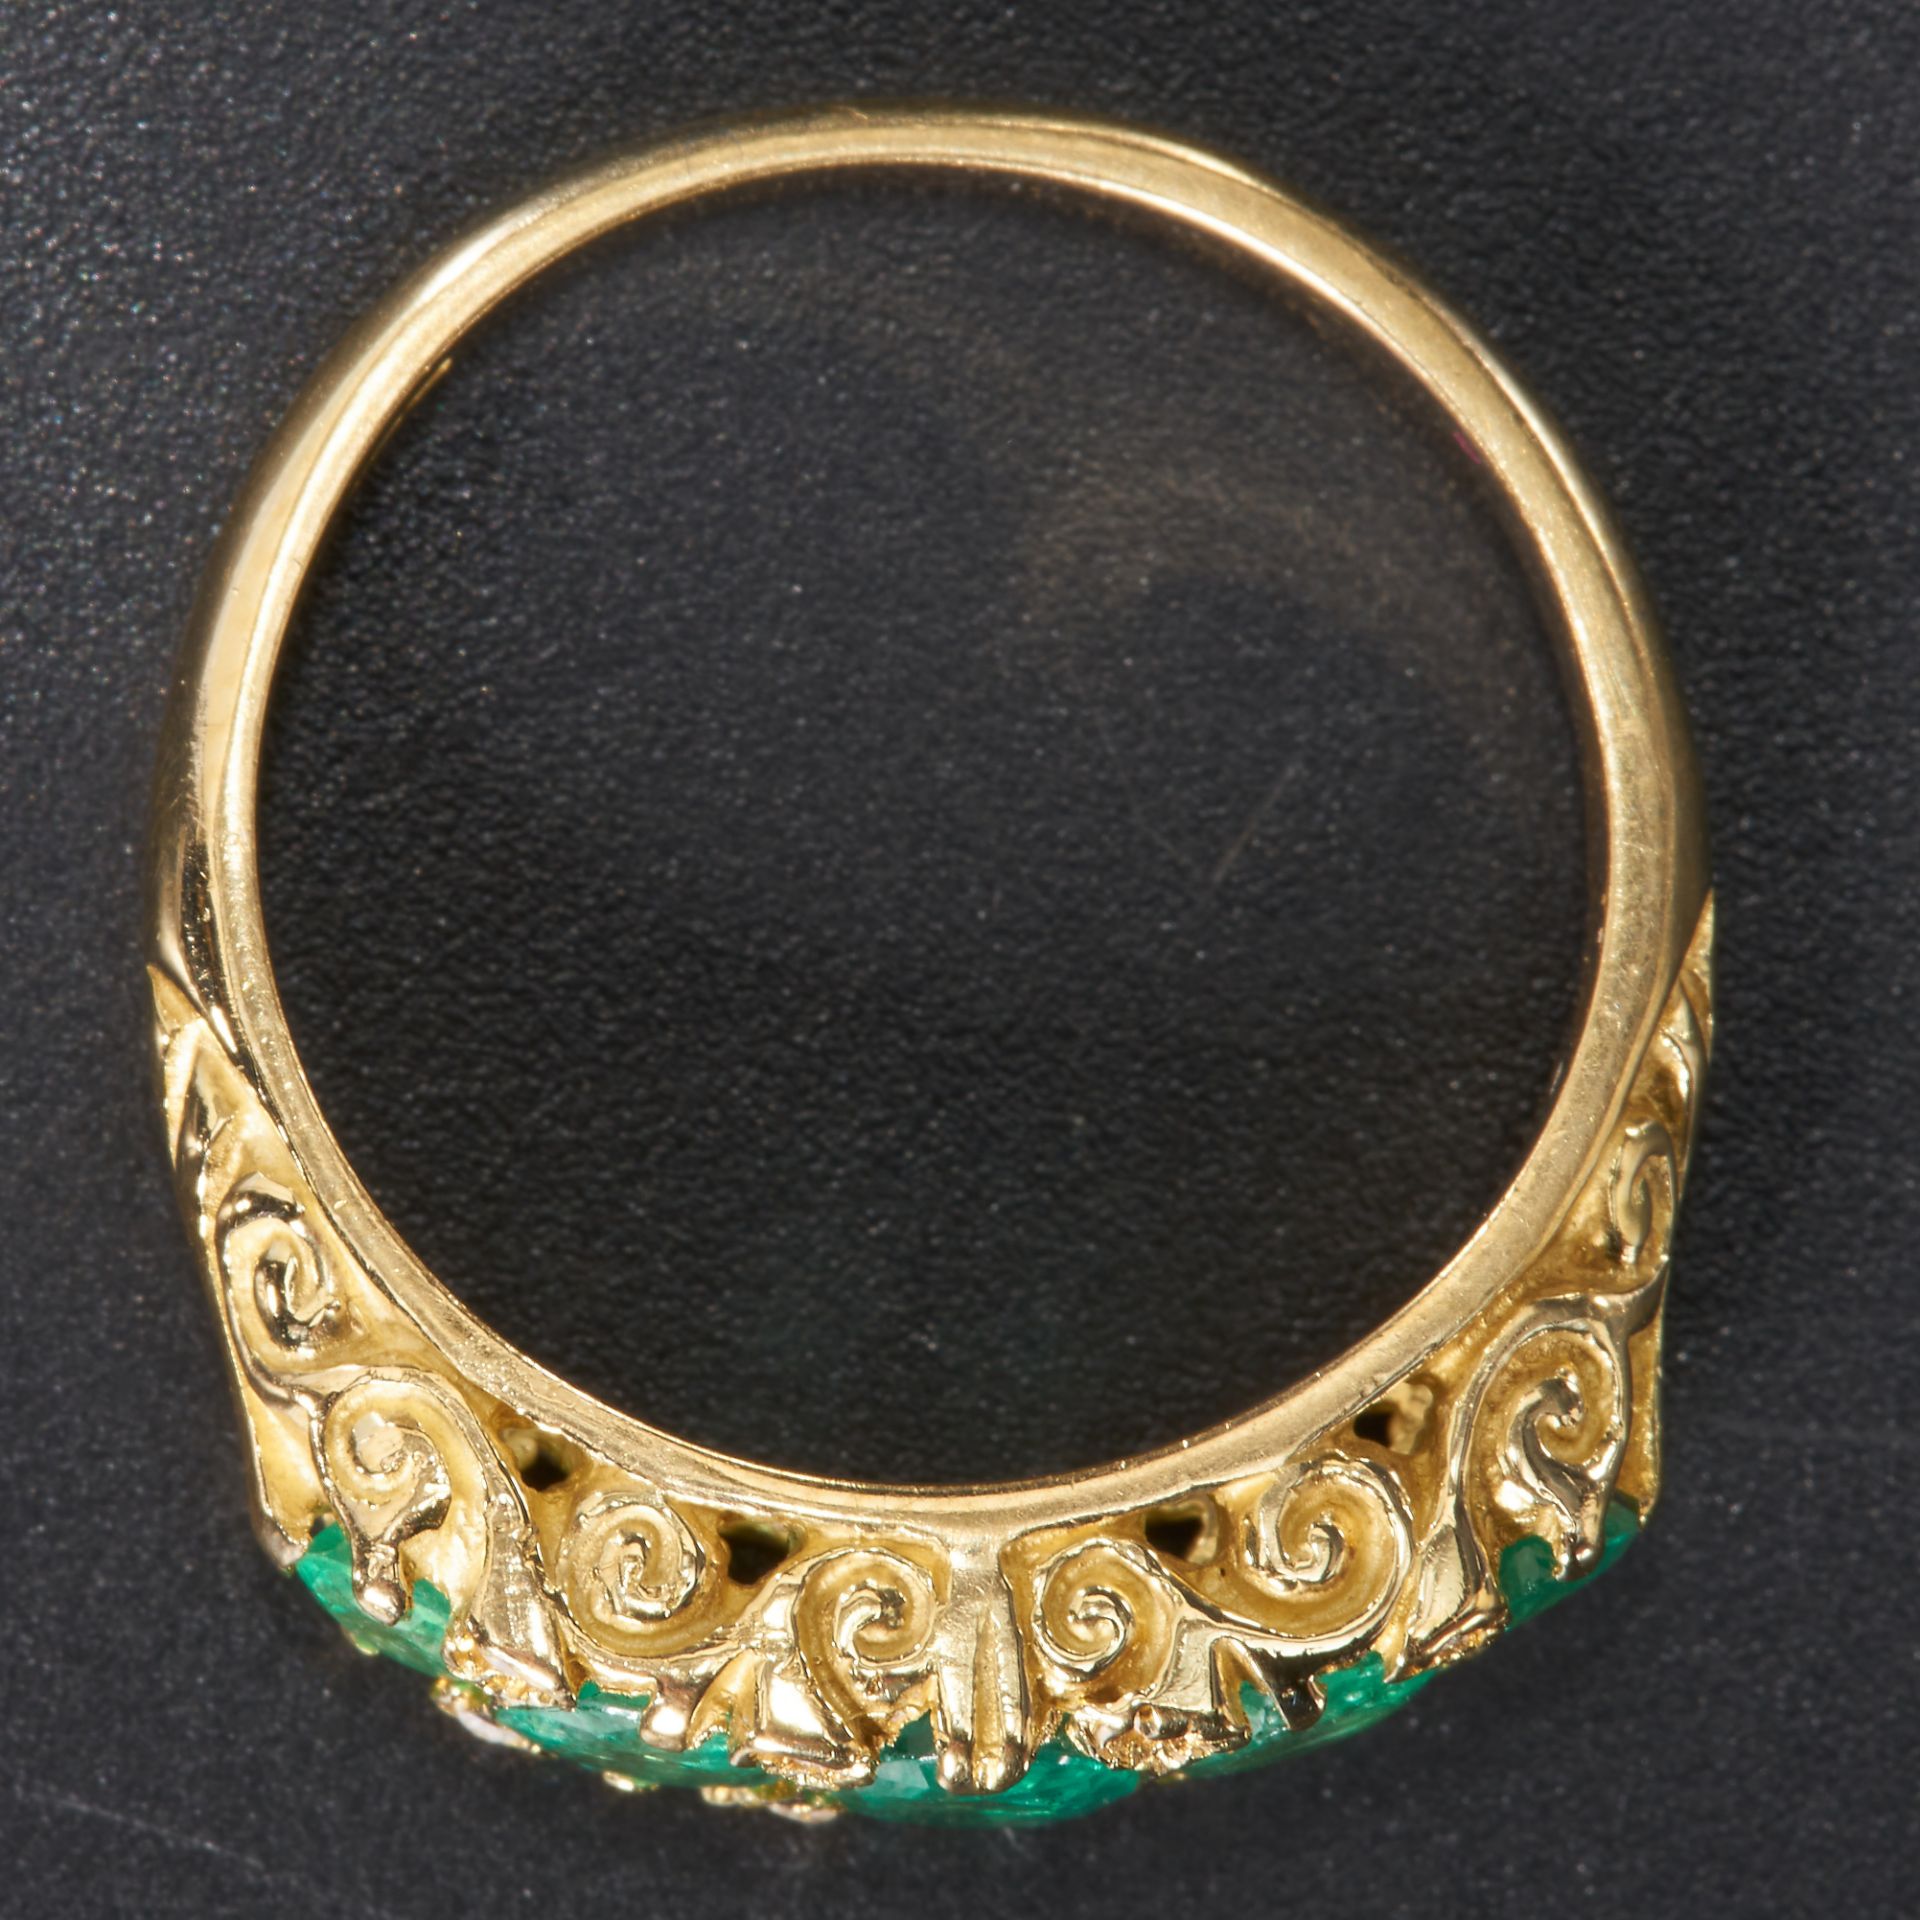 ANTIQUE EMERALD AND DIAMOND 5-STONE RING - Image 2 of 2